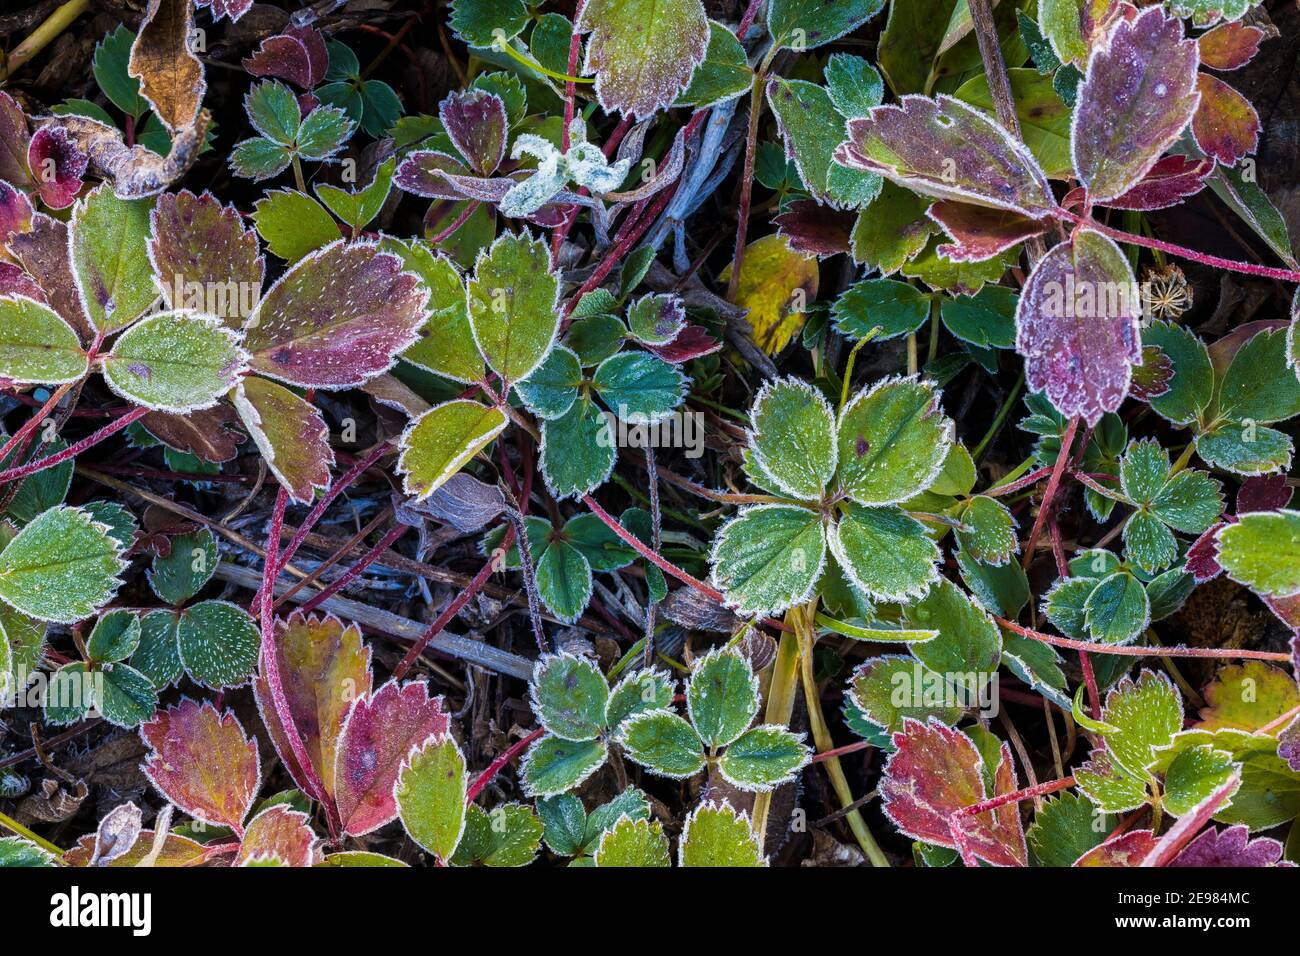 Frosty Woodland Strawberry, Fragaria vesca, leaves in autumn in Kootenay National Park in the Canadian Rockies, British Columbia, Canada Stock Photo